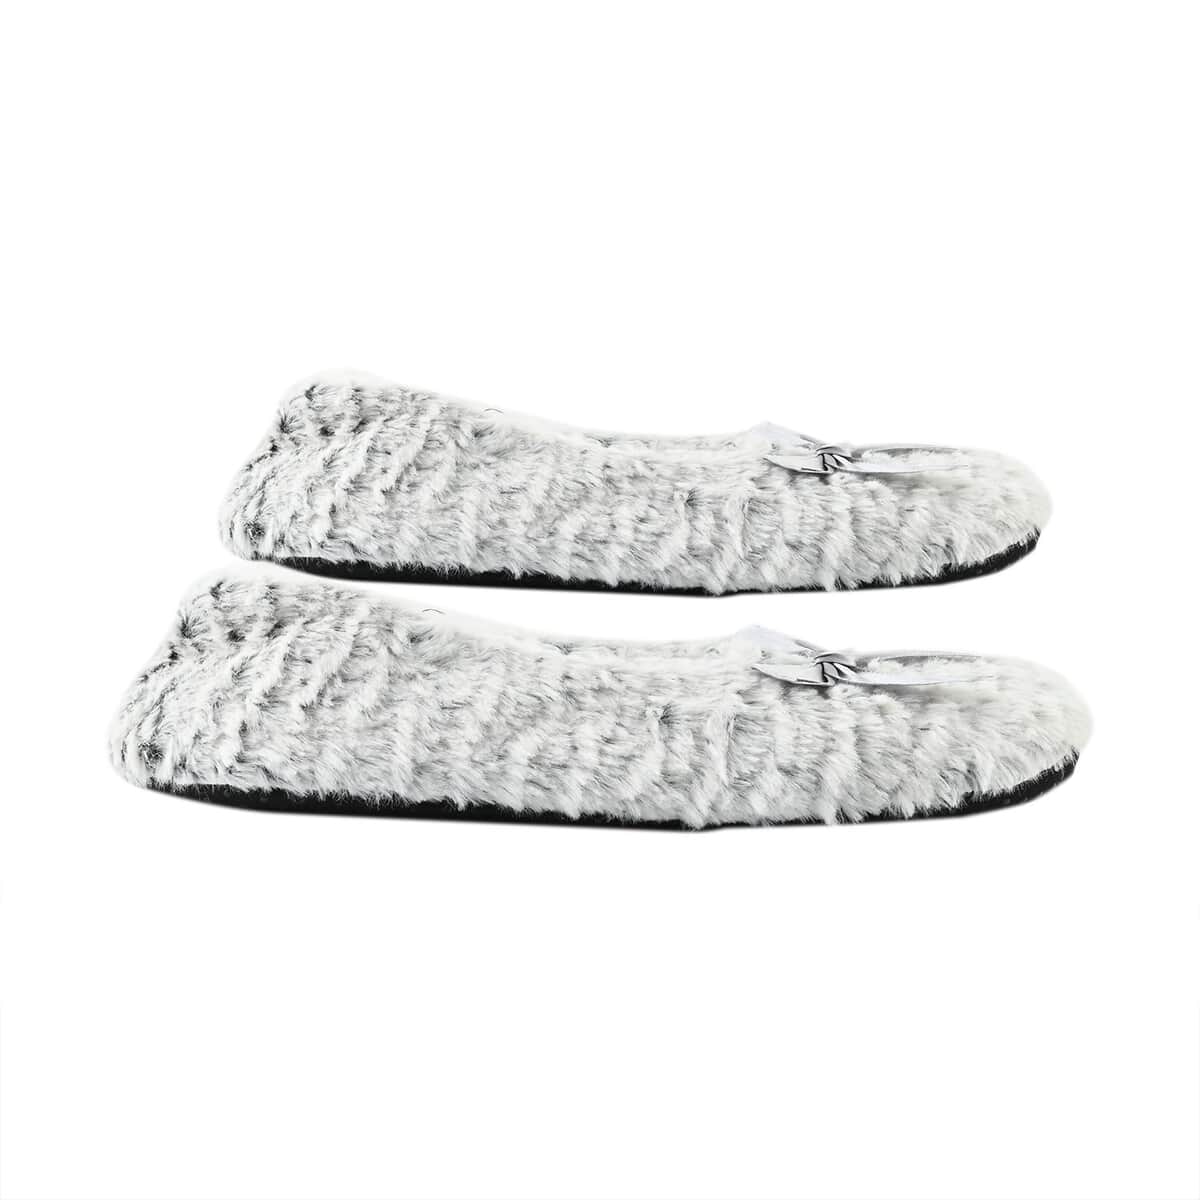 Homesmart Gray Microfiber Faux Fur, Sherpa Booties and Matching Ballerina Slippers (Women's Size 5-10) image number 4